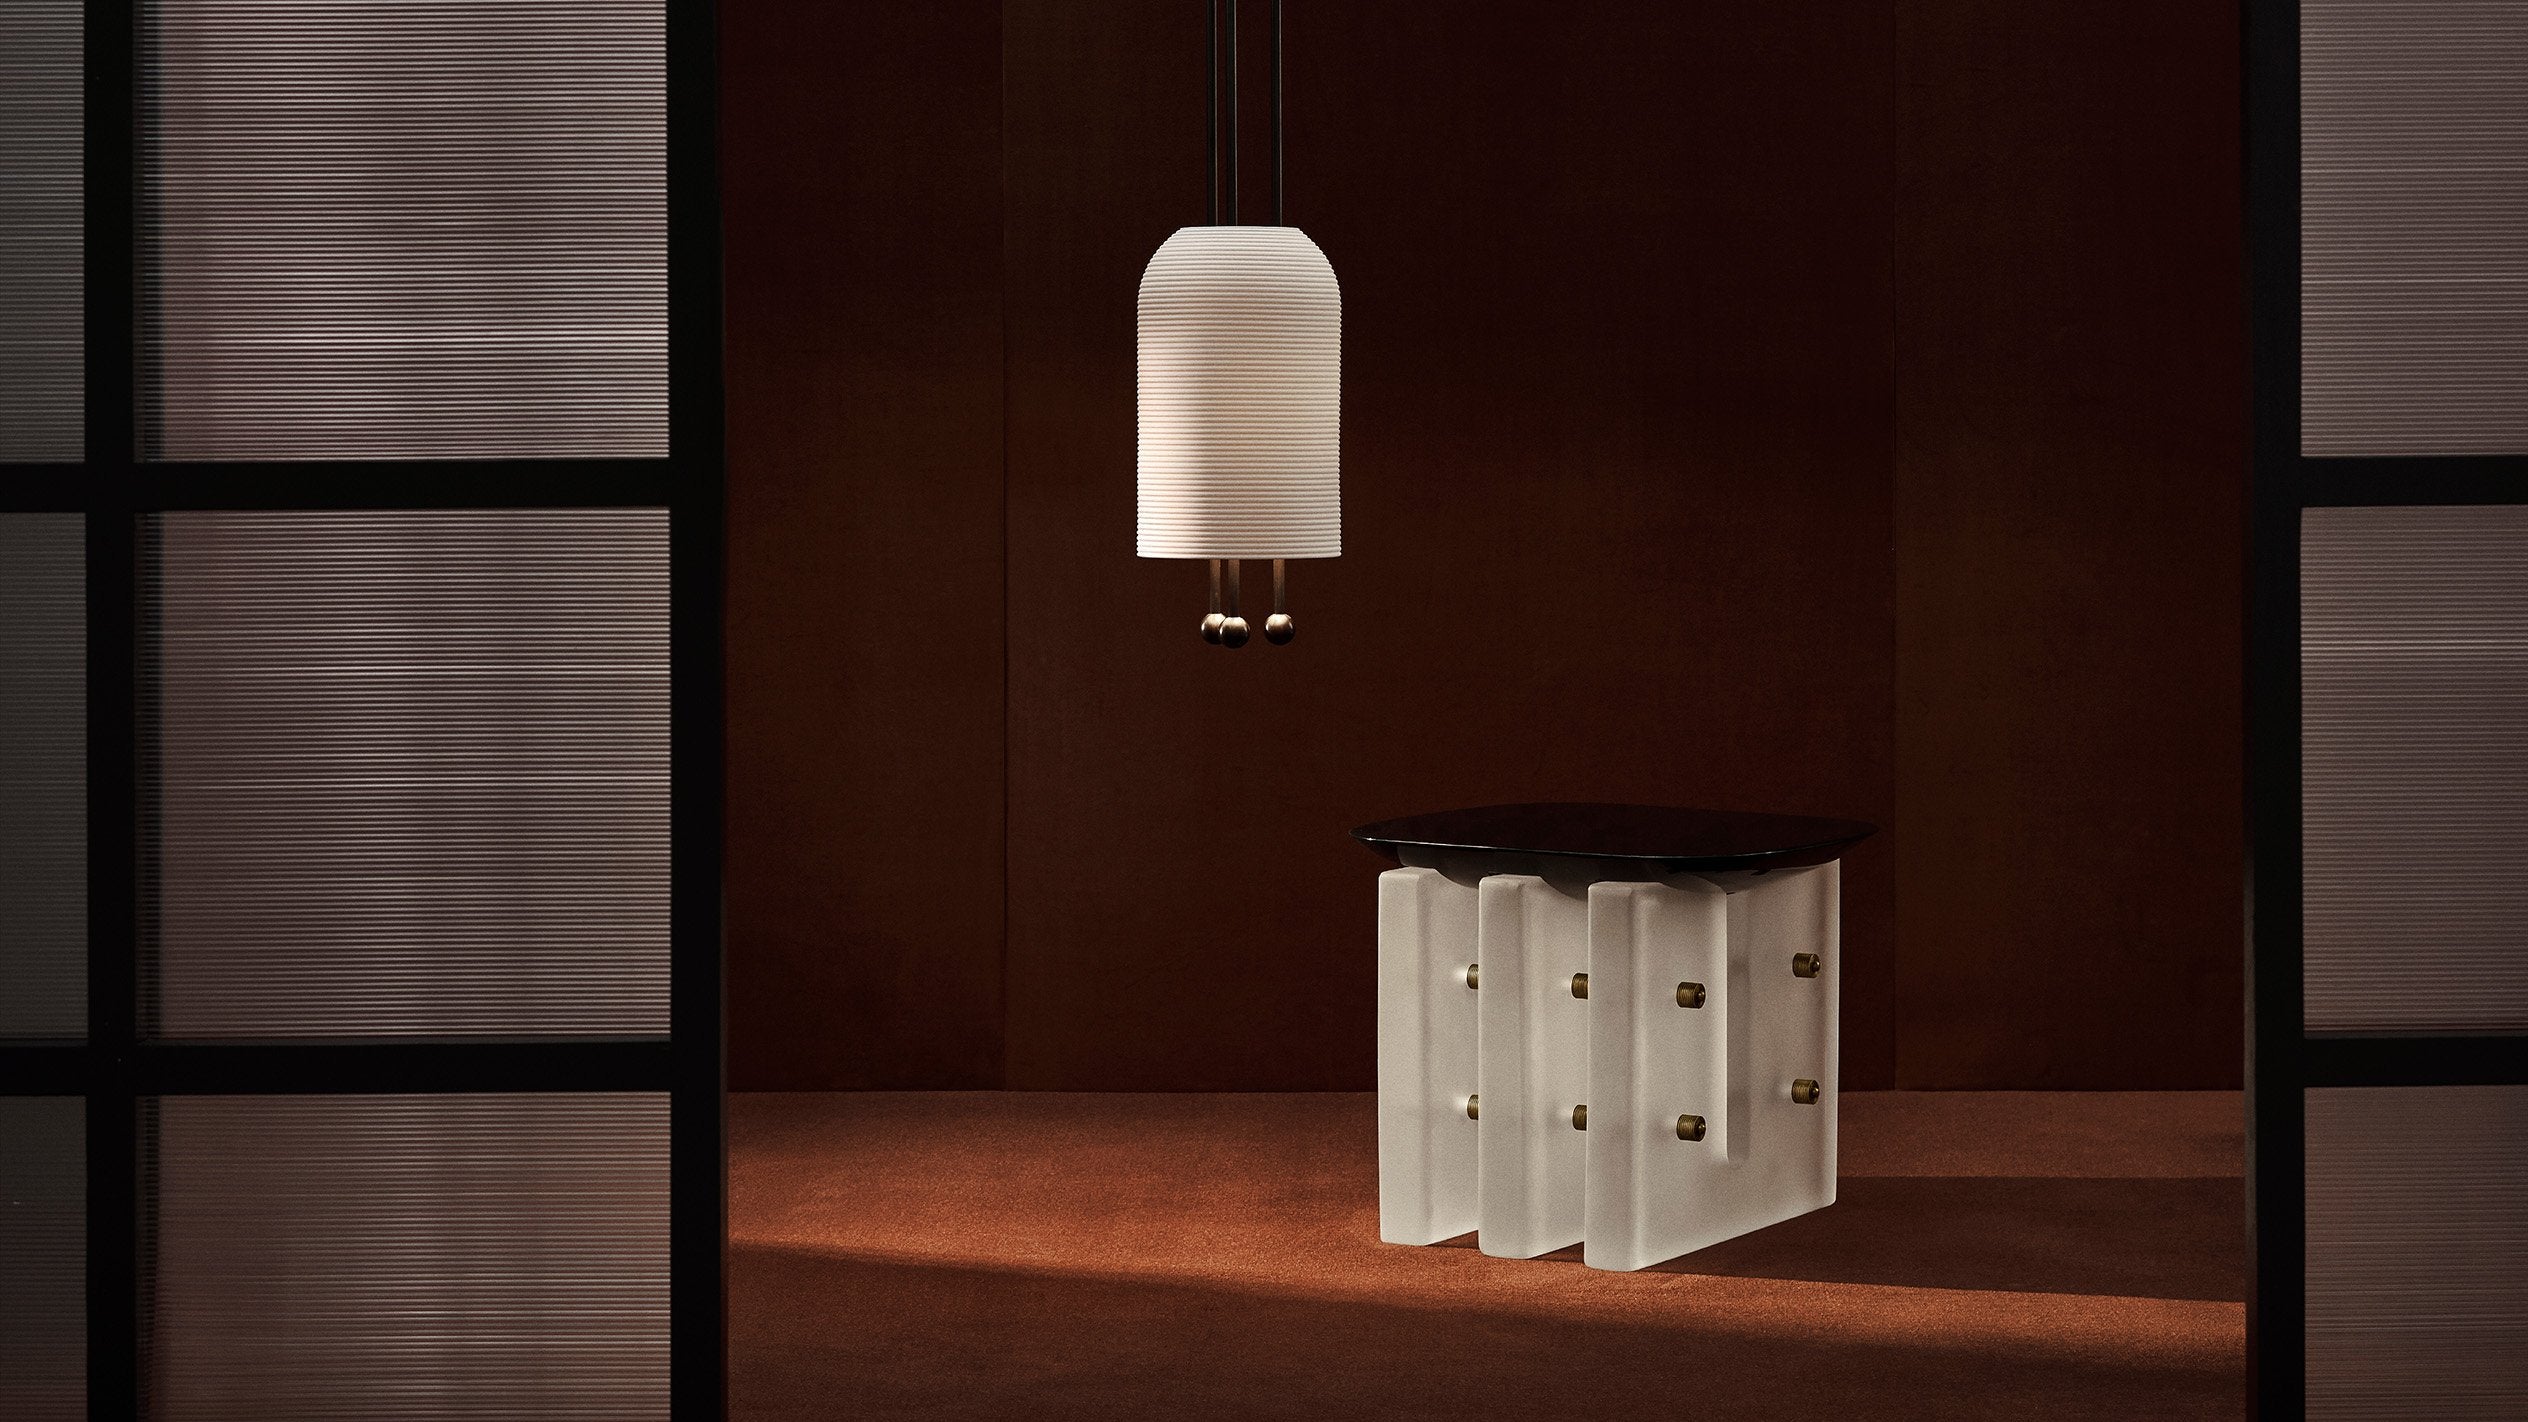 SEGMENT side table in Black Lacquer with a LANTERN ceiling pendant hanging overhead.